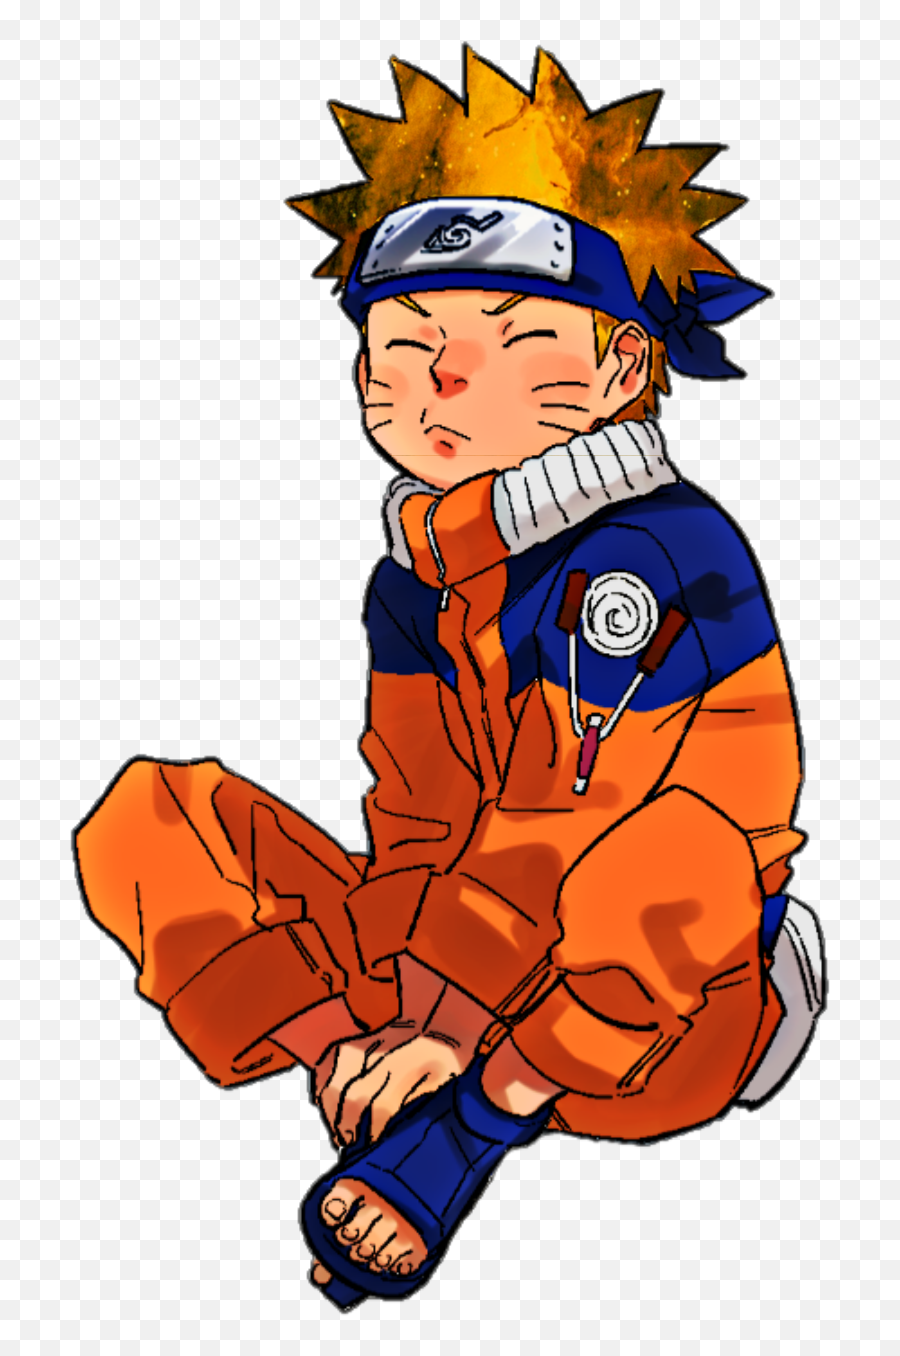 The Coolest Naruto Anime Images And Photos On Picsart - For Kid Emoji,Naruto Emojis